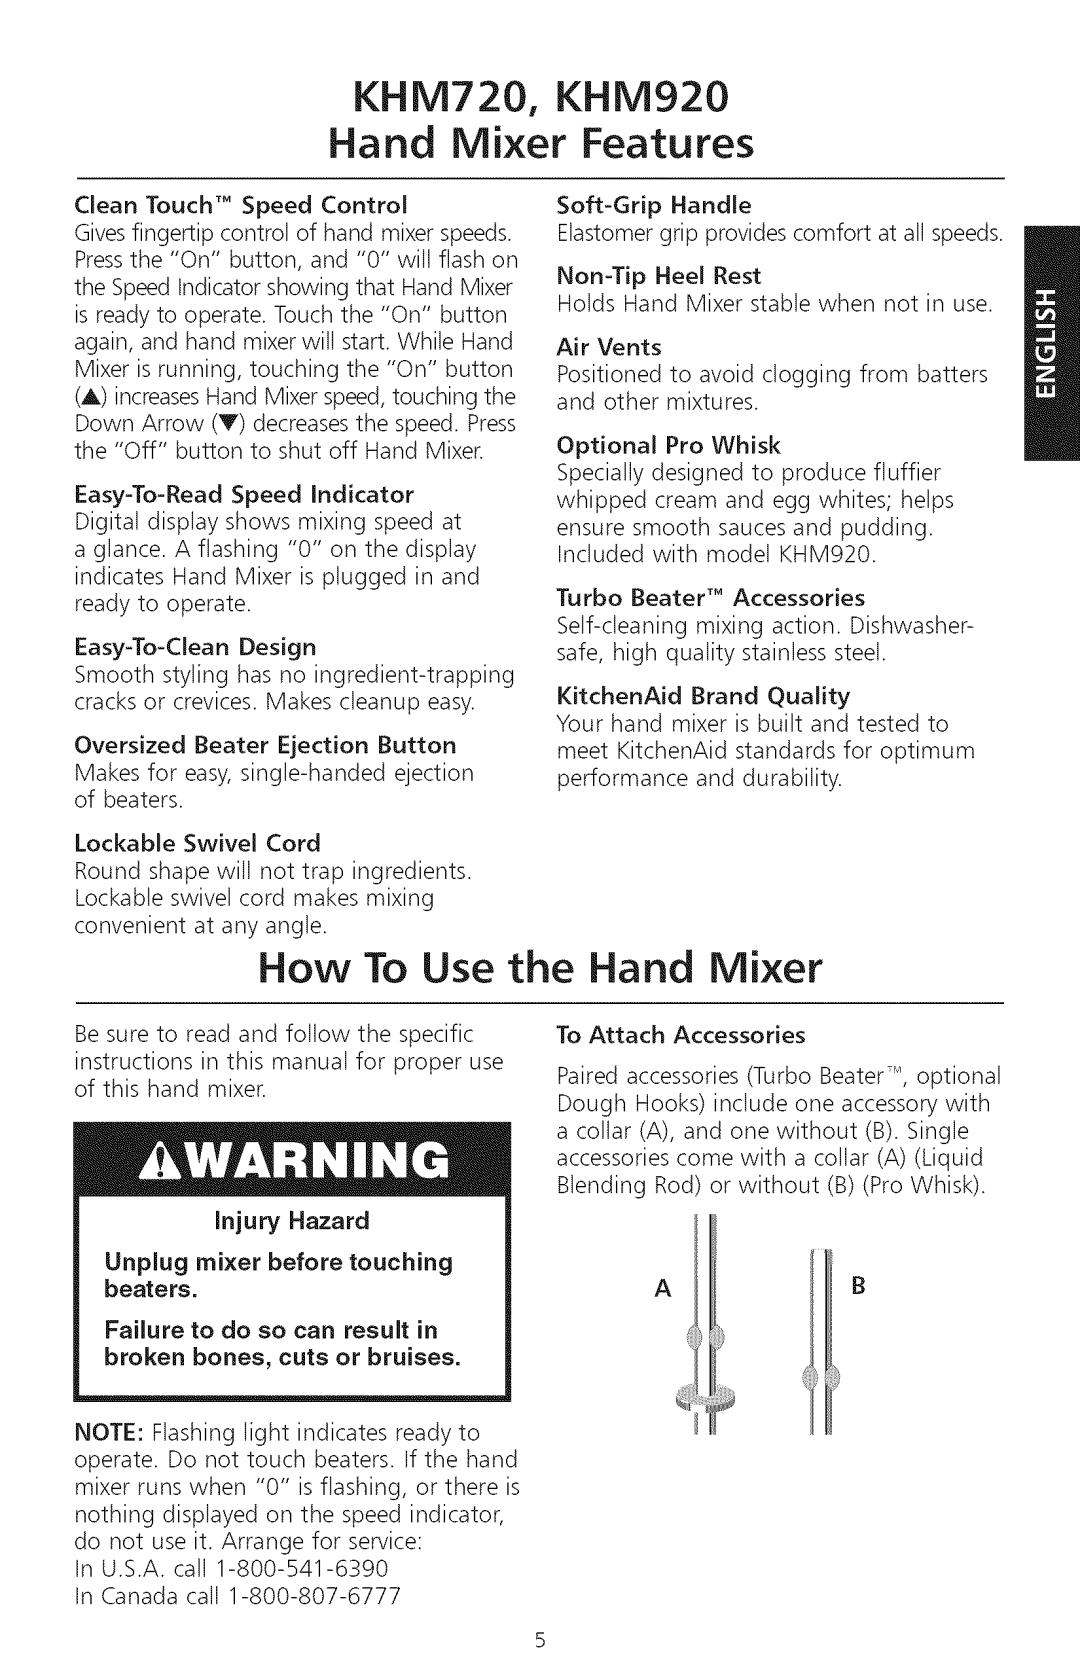 KitchenAid manual How To Use the Hand Mixer, KHM720 Hand Mixer, KHM920 Features, Failure to do so can result in 